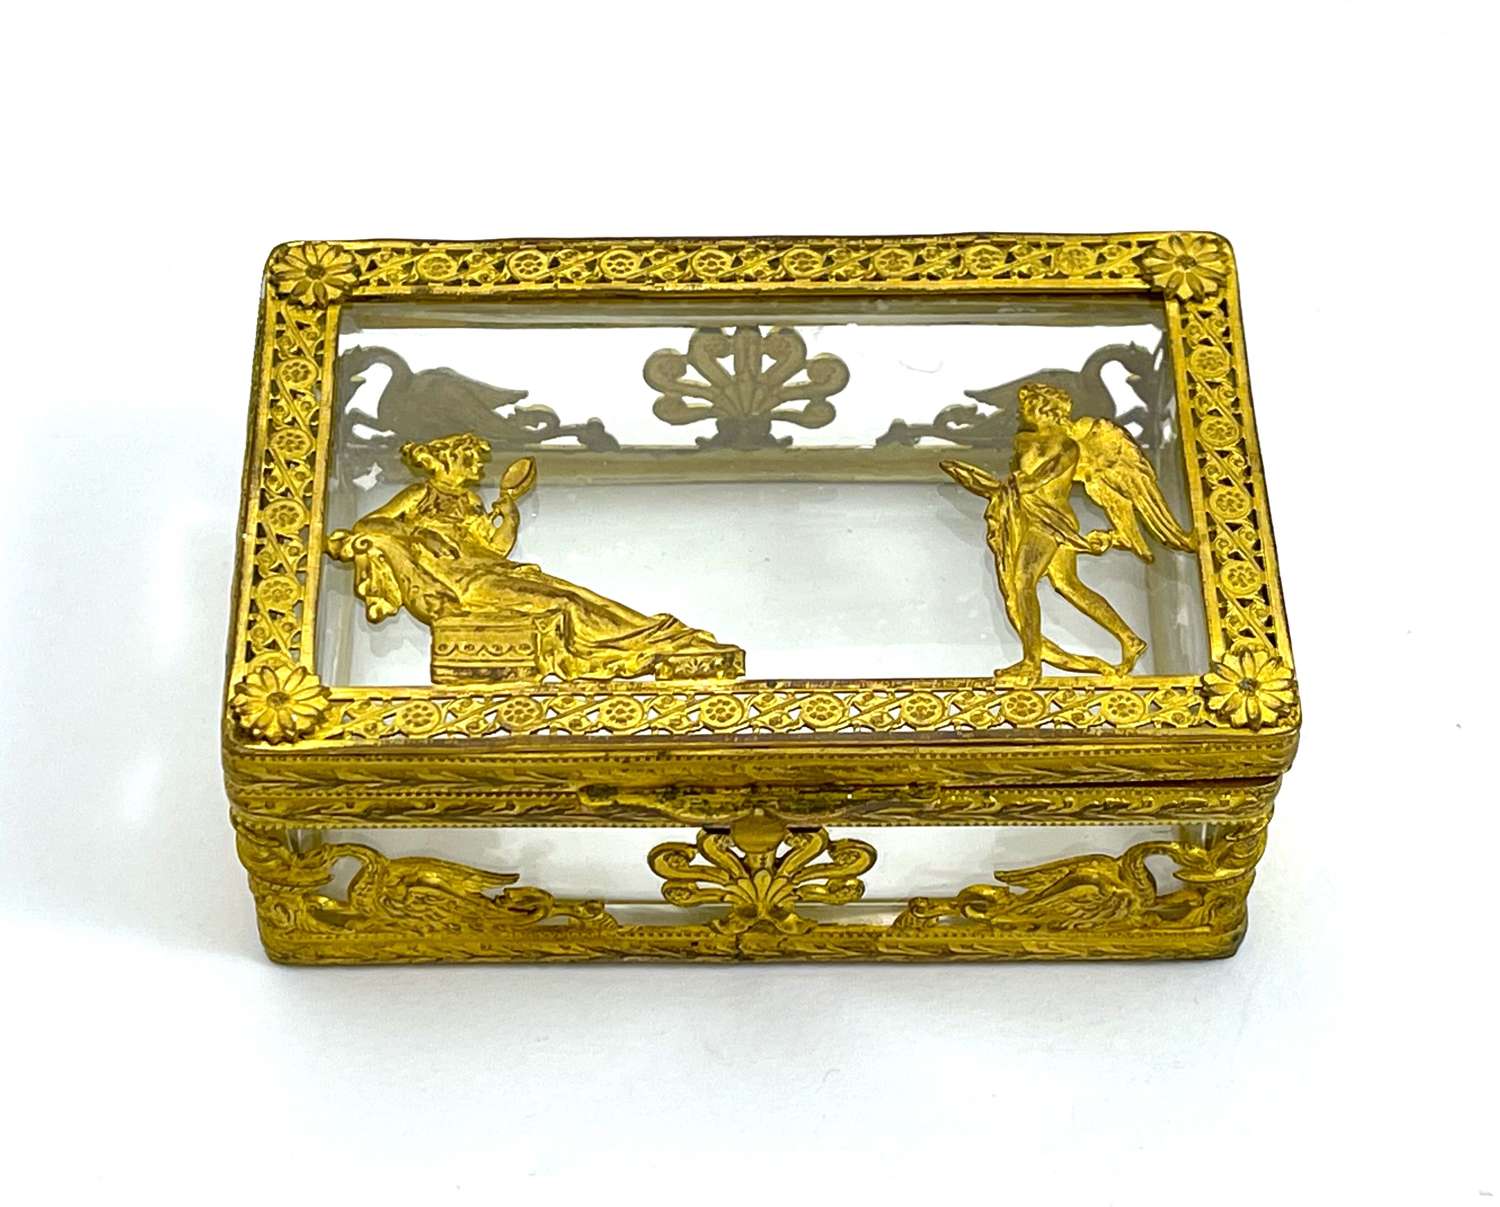 Antique French Empire Cut Crystal and Dore Bronze Casket Box